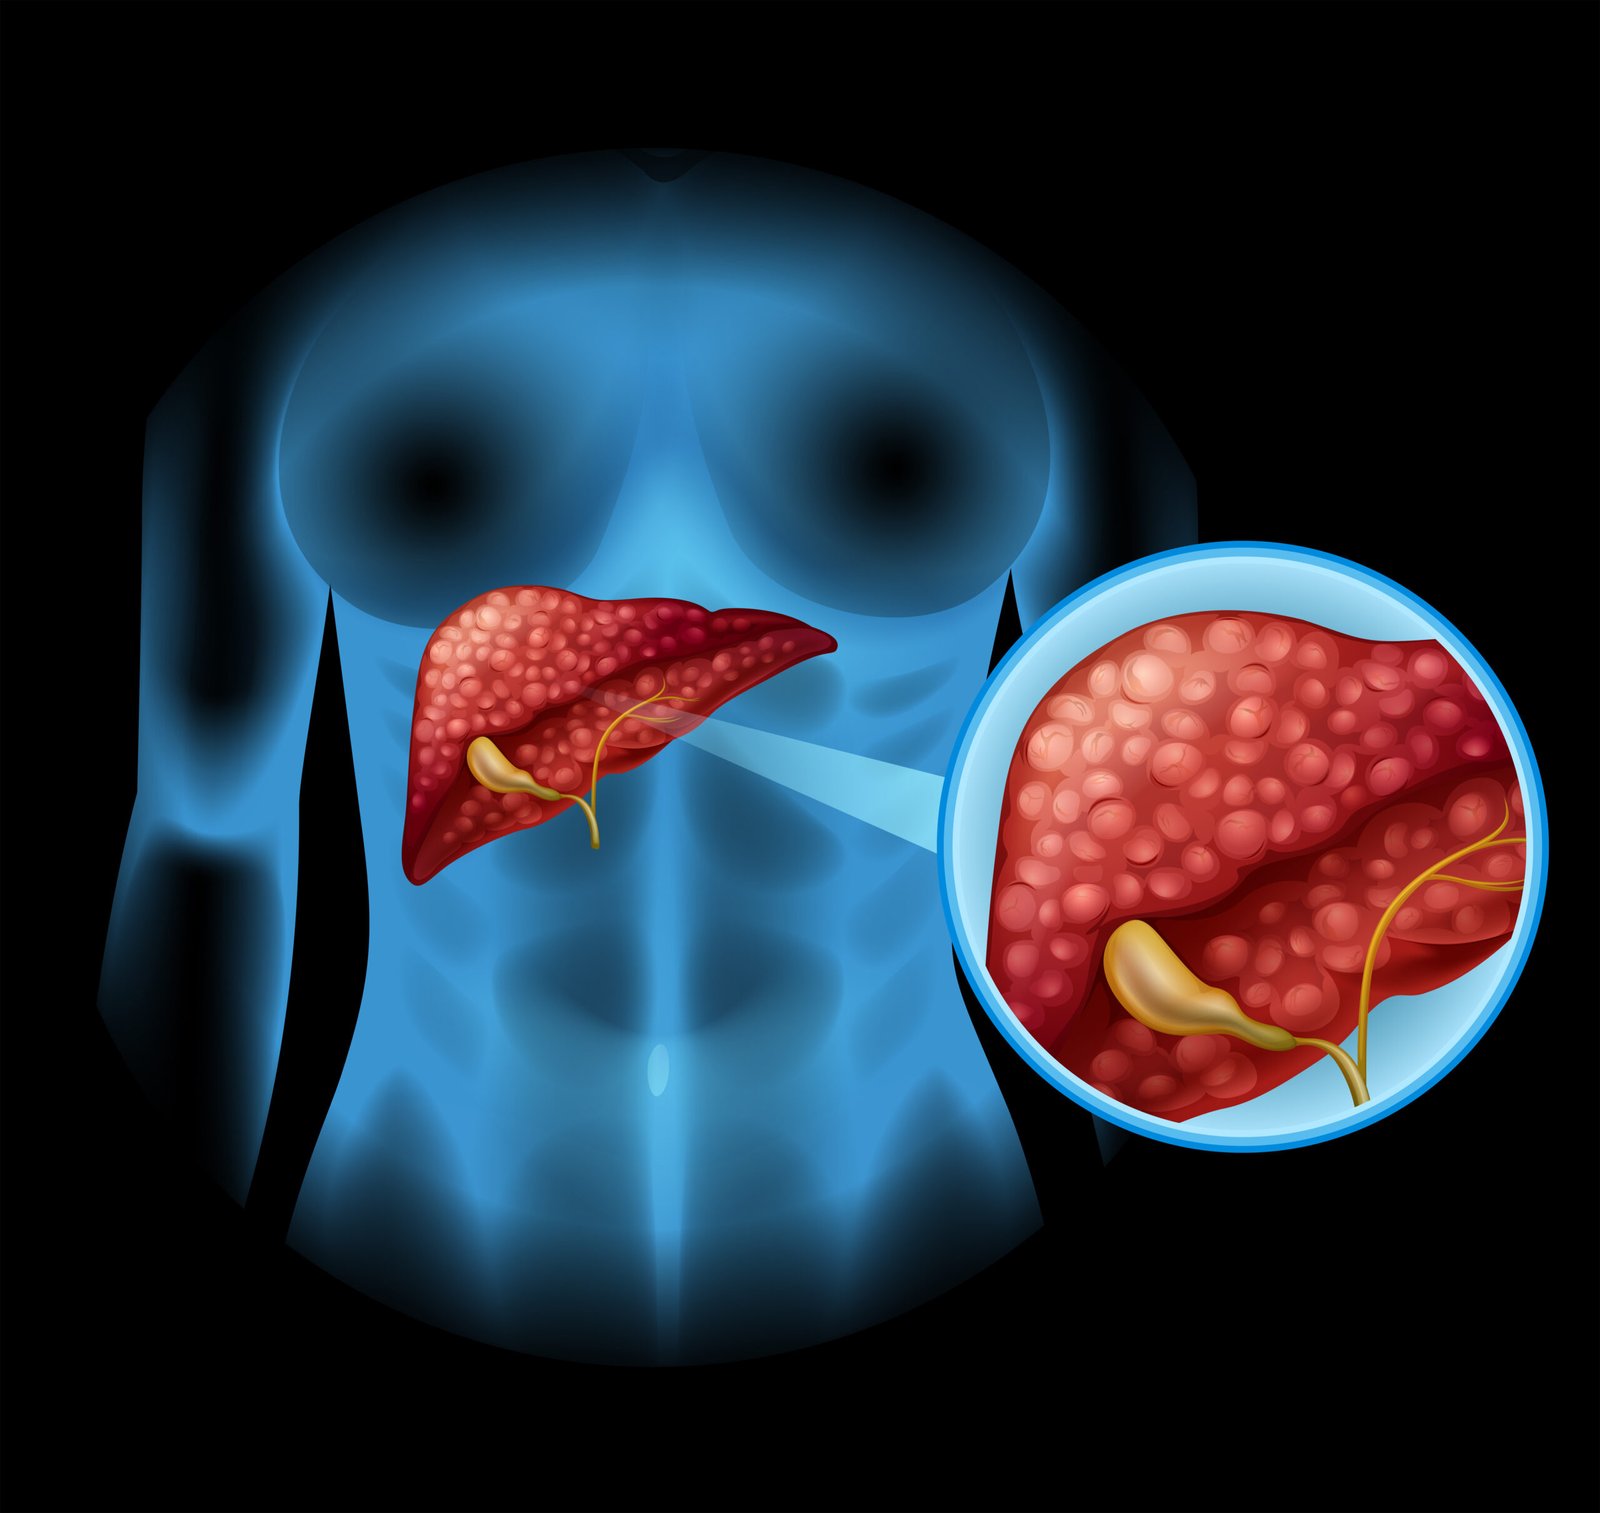 Diagnosing Gallstones with Ultrasound Scanning